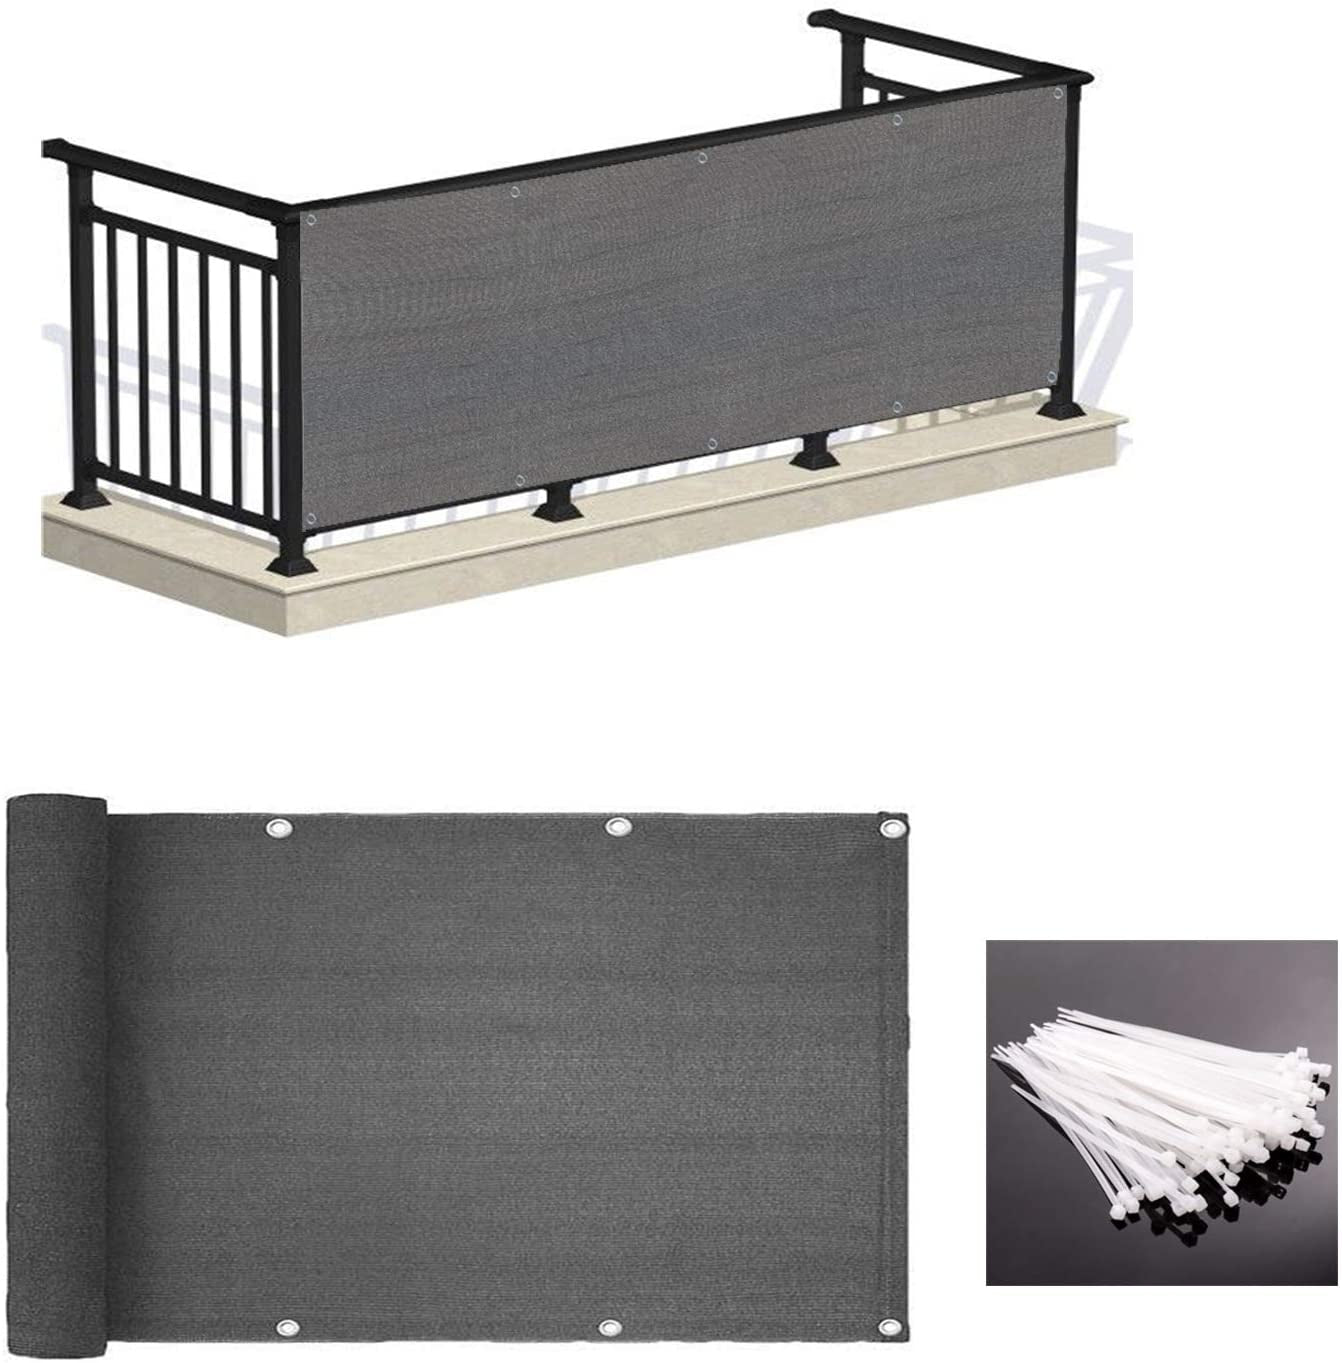 LOVE STORY, LOVE STORY Balcony Privacy Screen, 3.3' X 19.5' Sand Deck Shield Screen Fence Cover,Uv Protection and Weather-Resistant,3 FT Height for Deck, Patio, Backyard, Outdoor Pool, Porch, Railing